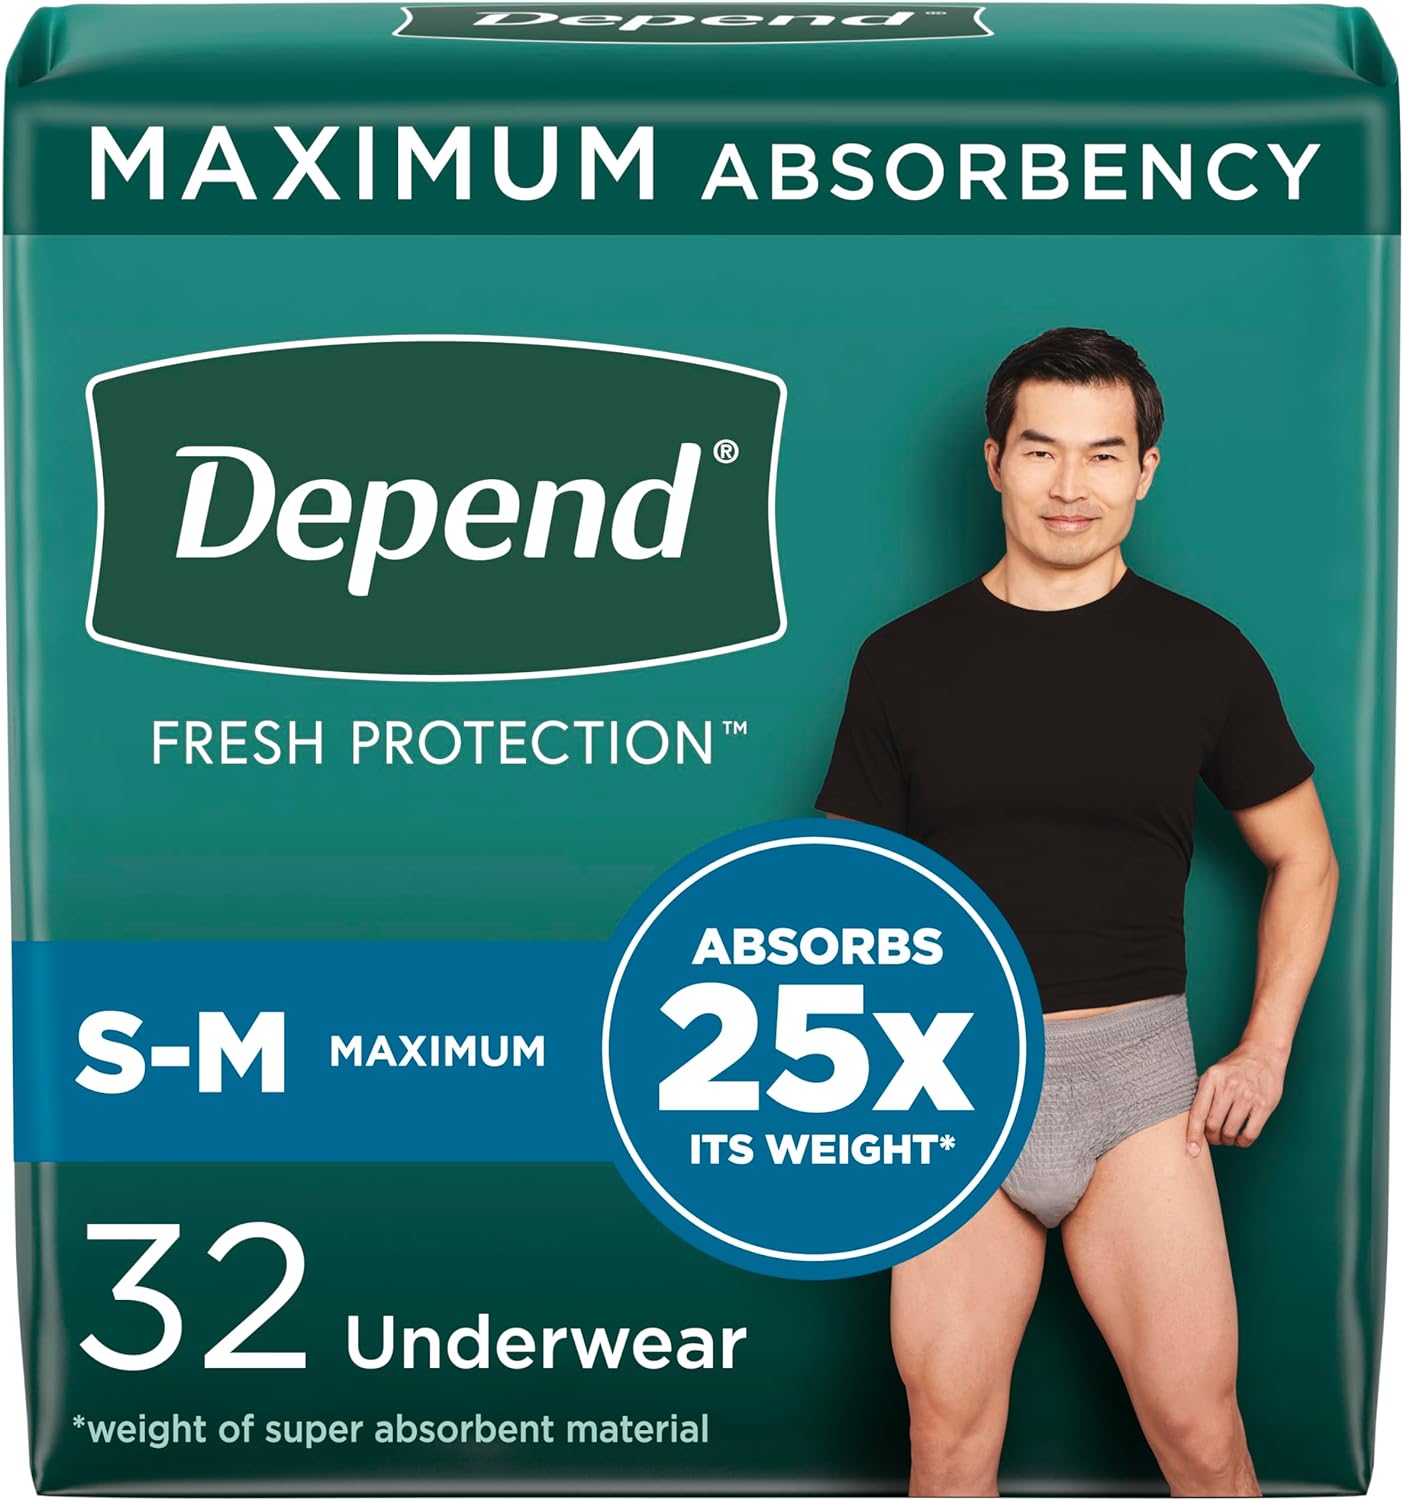 Depend Fresh Protection Adult Incontinence Underwear for Men (Formerly Depend Fit-Flex), Disposable, Maximum, Small/Medium, Grey, 32 Count, Packaging May Vary